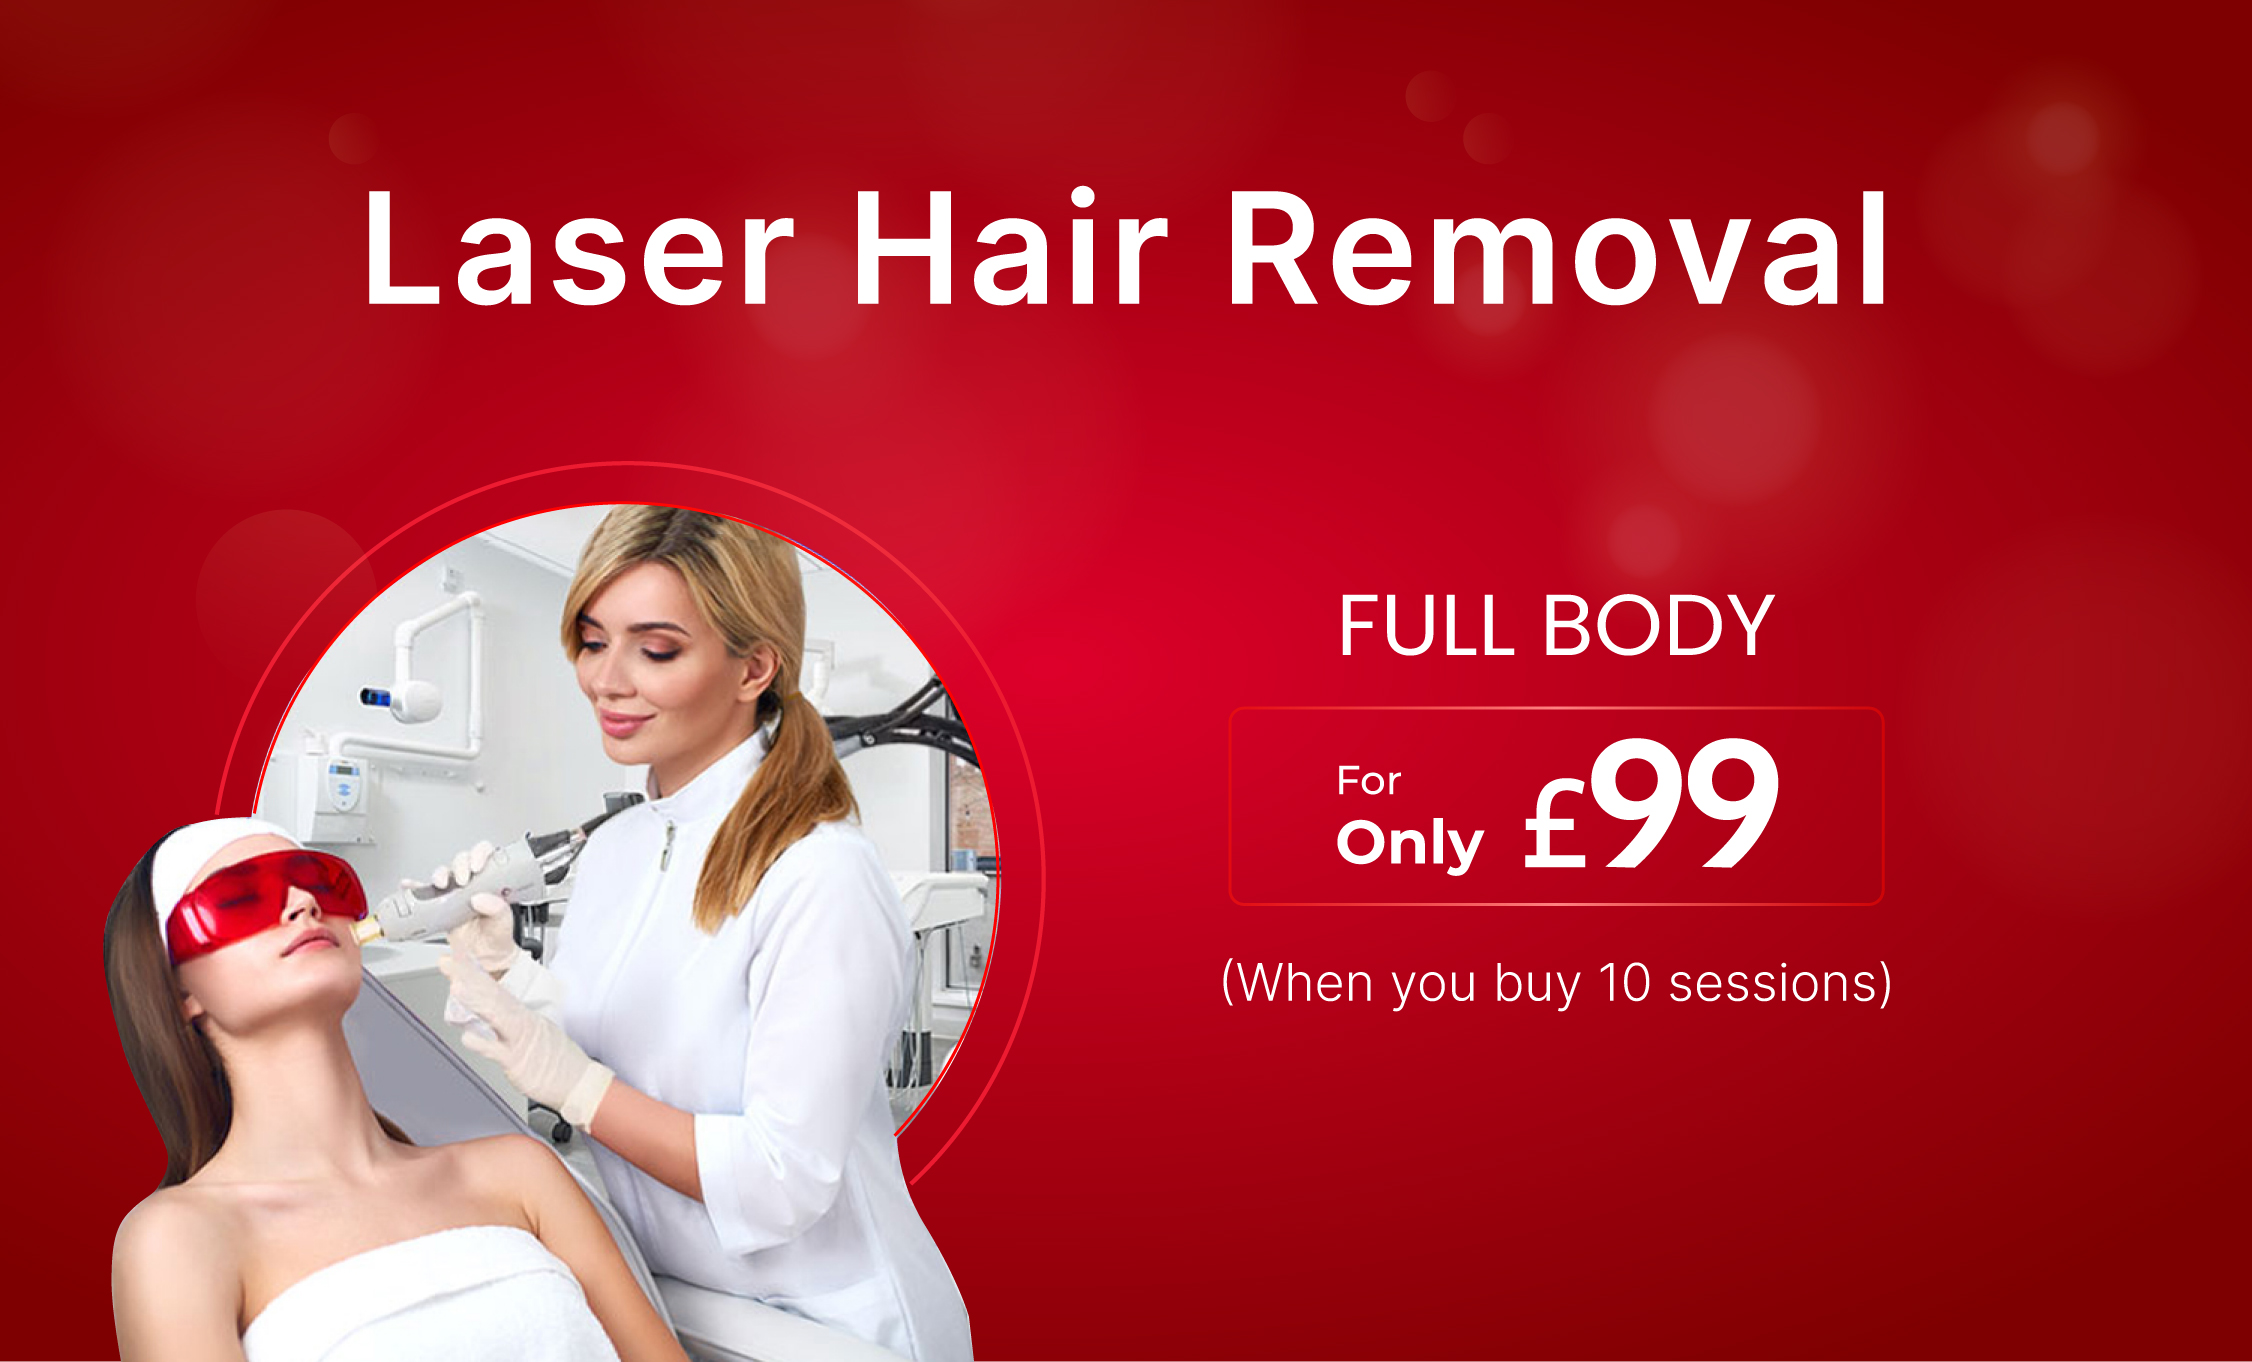 Laser Hair Removal Specialist | London Laser Clinic